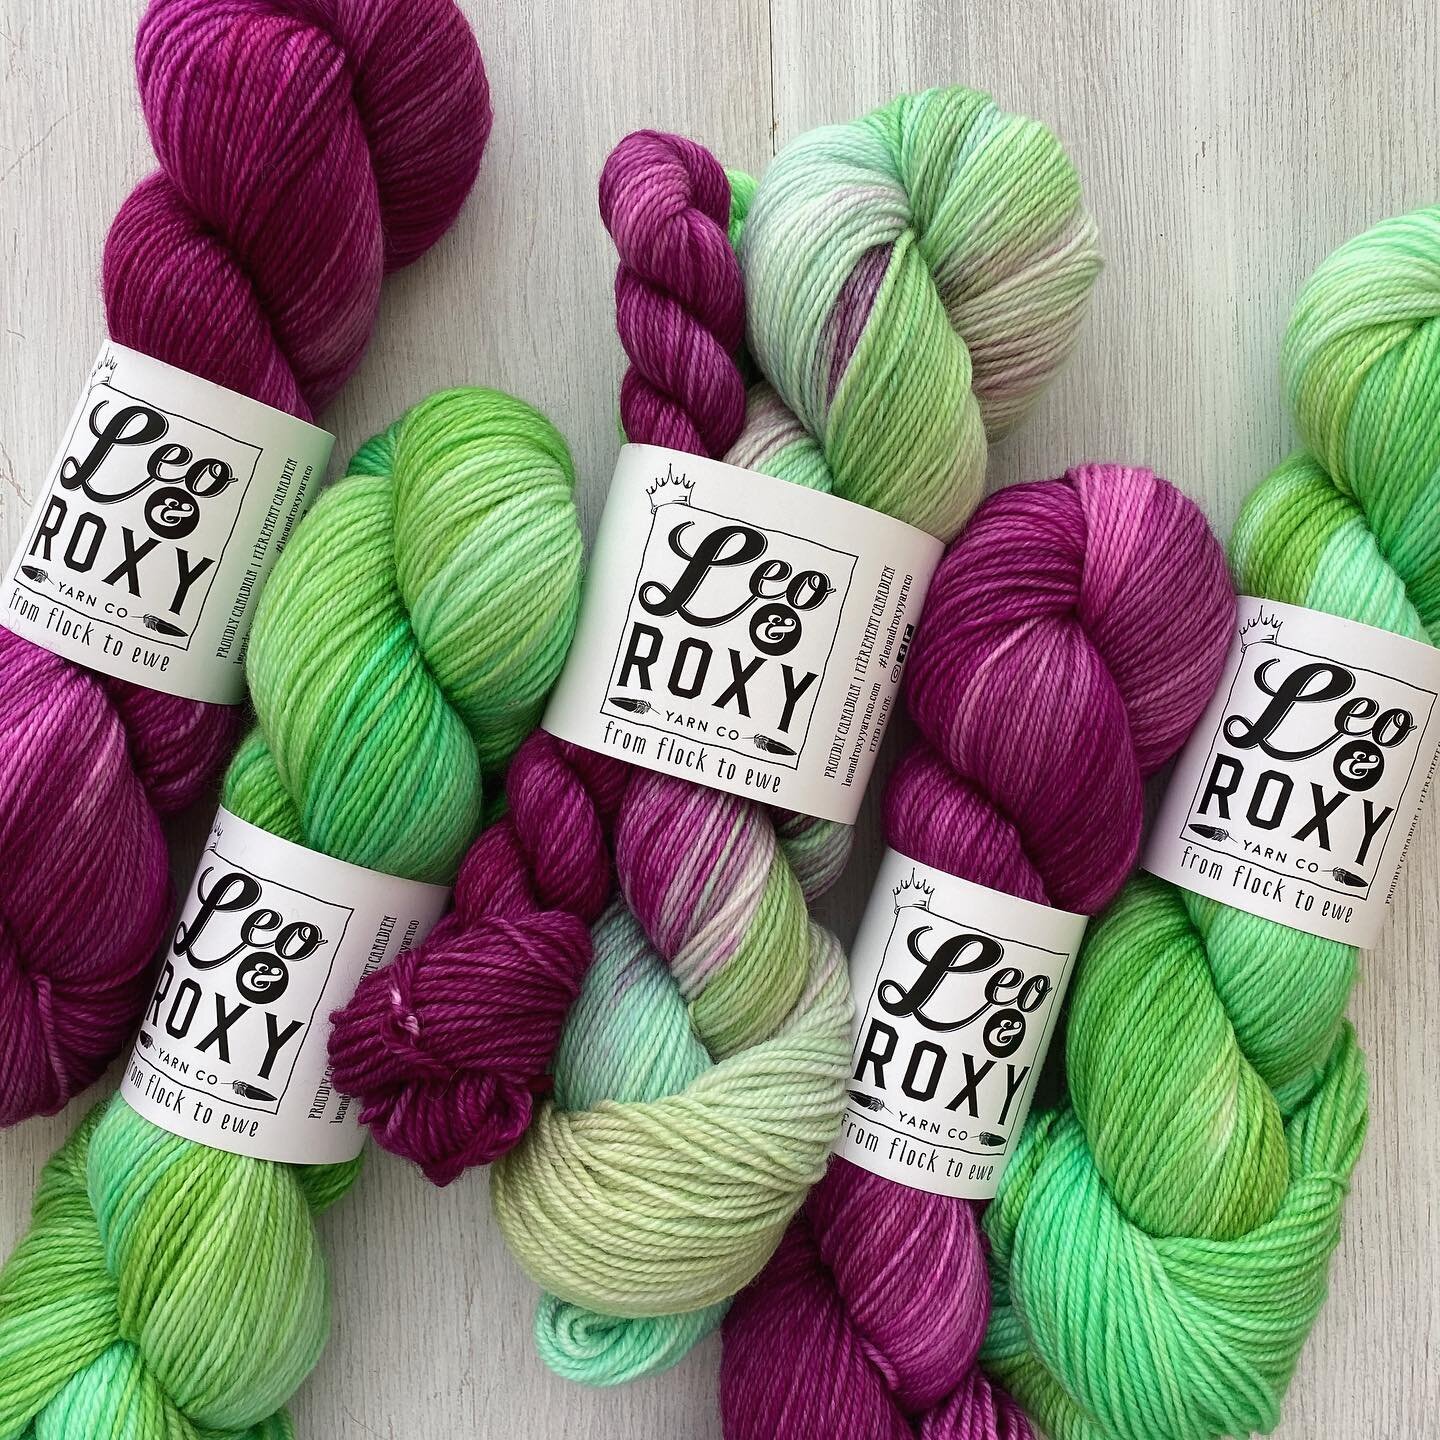 Here is the Knit City Montreal colourway for 2023. We&rsquo;ll have full sized skeins &amp;  sock sets!

Just 2 more sleeps!! Who&rsquo;s excited? 

#leoandroxyyarnco #colourfulyarn #brightyarn #indiedyer #handdyedyarn #indiedyersofinstagram #indiedy